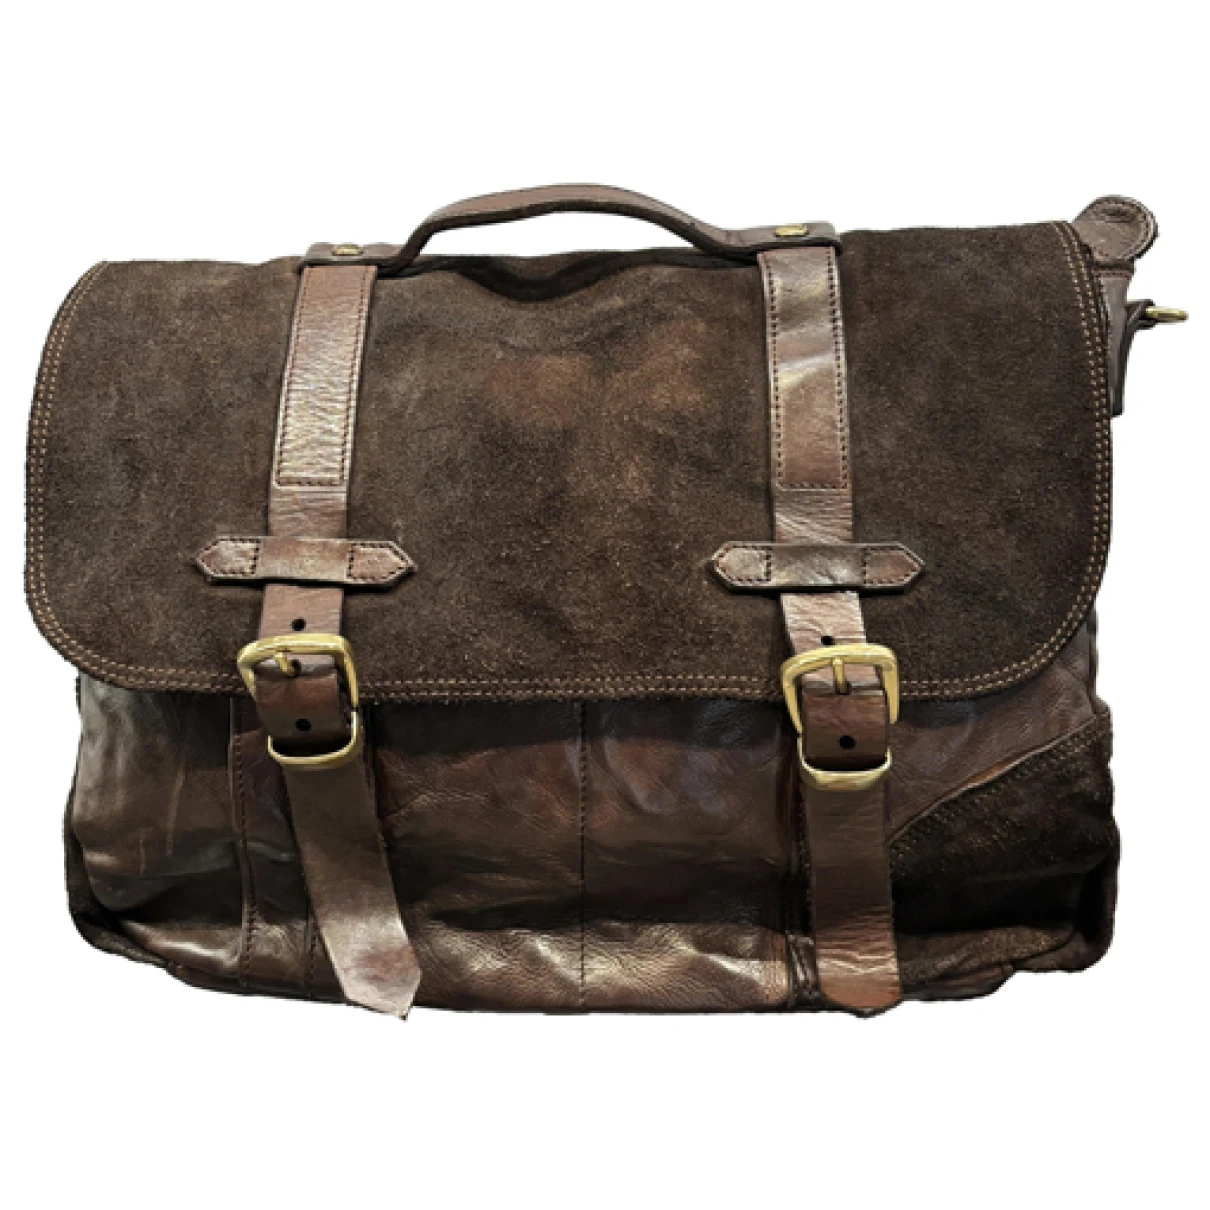 Pre-owned Campomaggi Leather Travel Bag In Brown